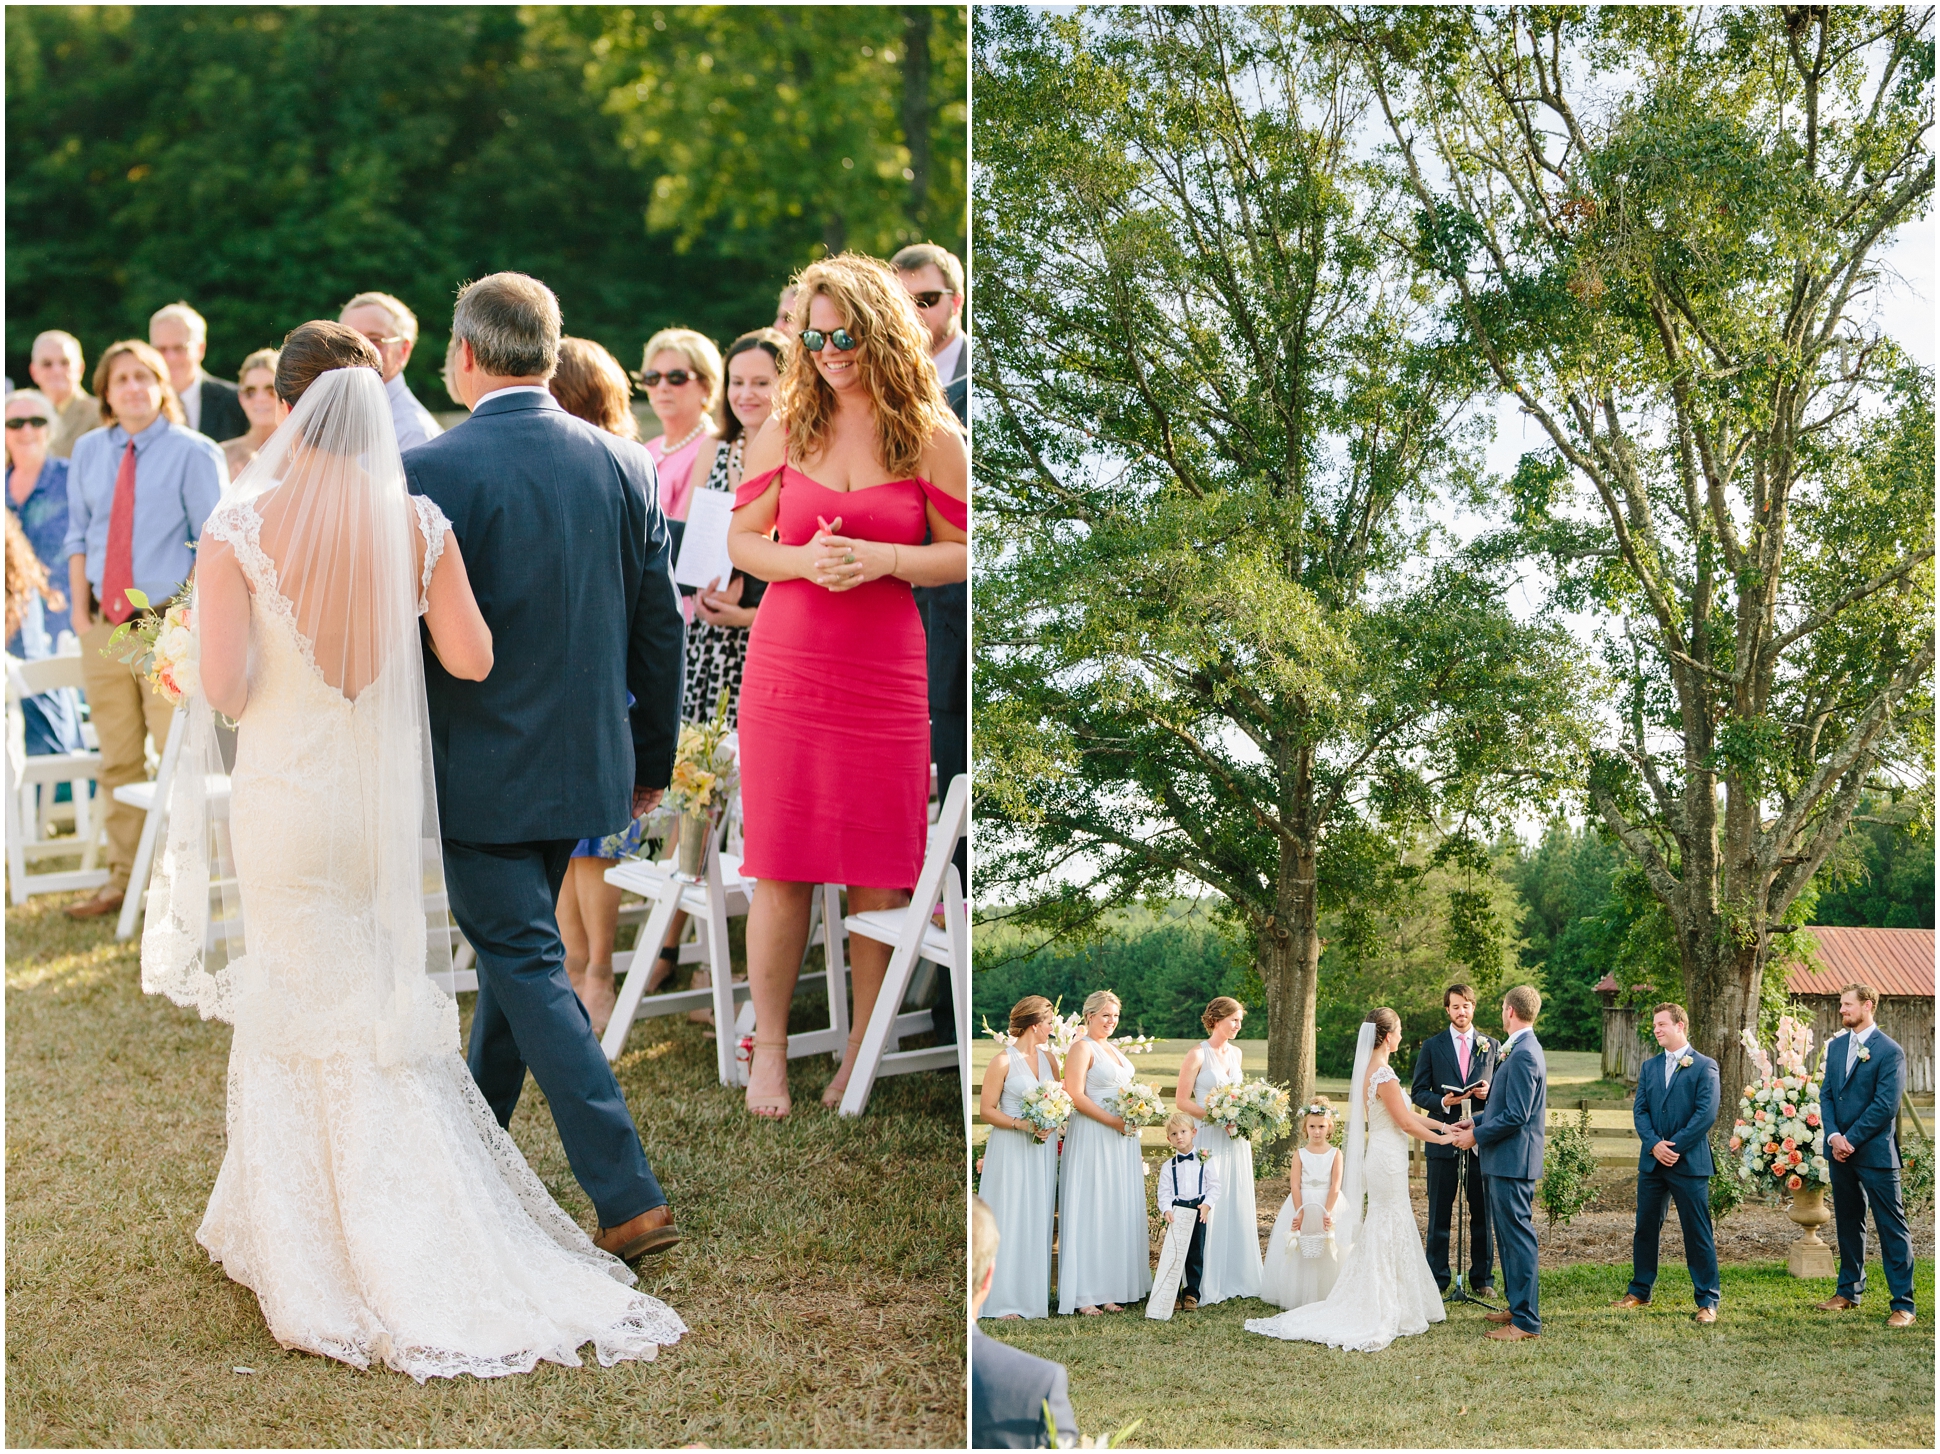 Two Chics Photography | The Corry House Wedding | www.twochicsphotography.com